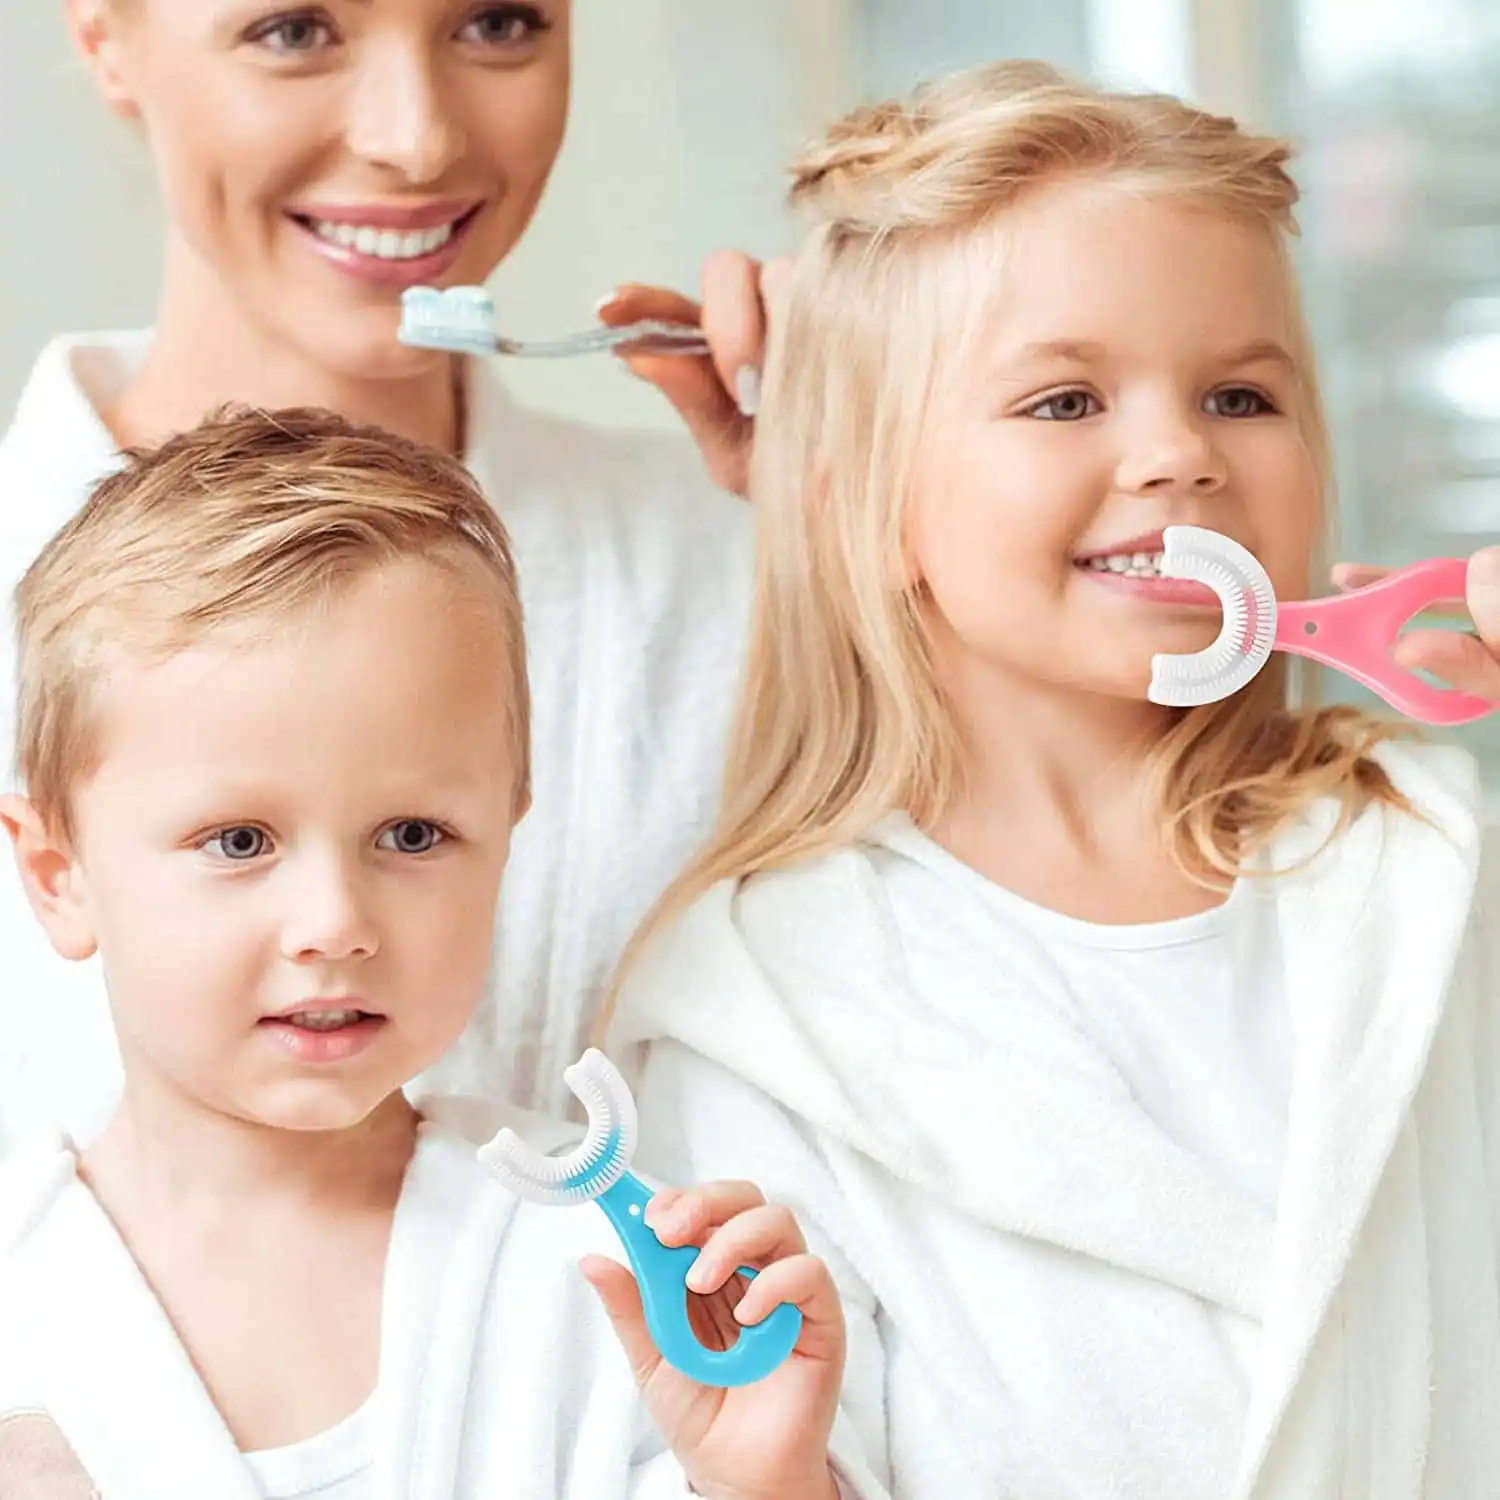 Pack of 3 U-Shaped Children's Toothbrushes